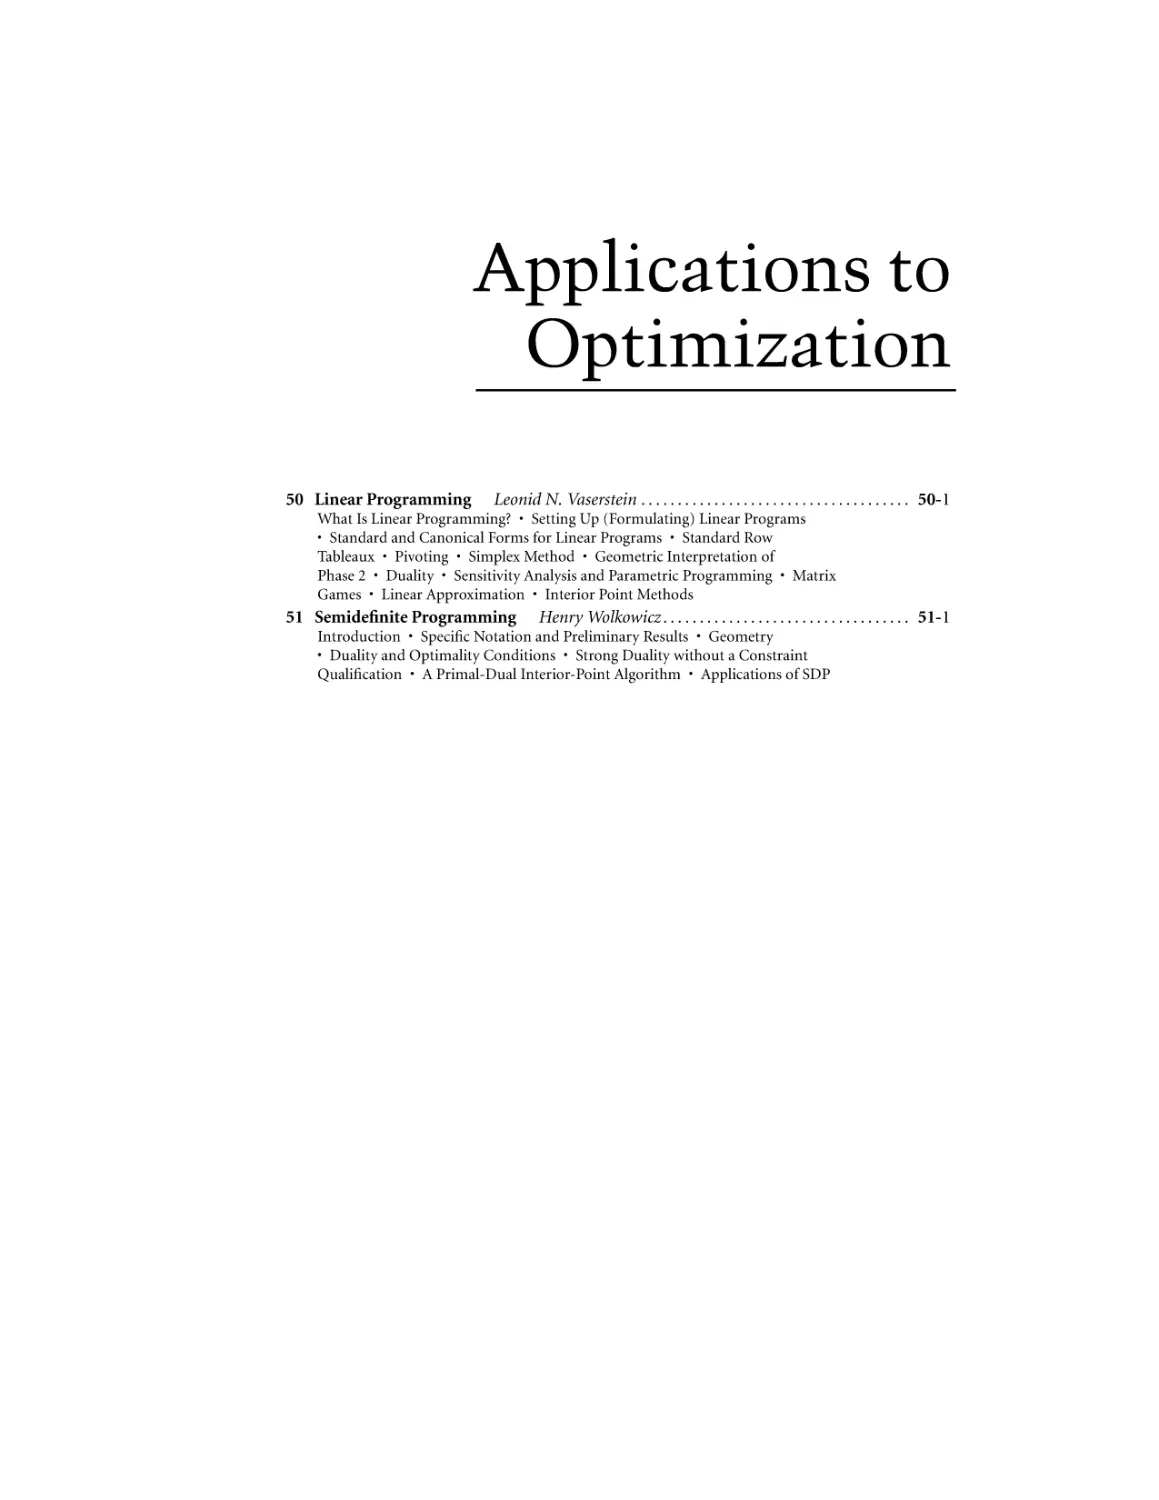 Applications to Optimization